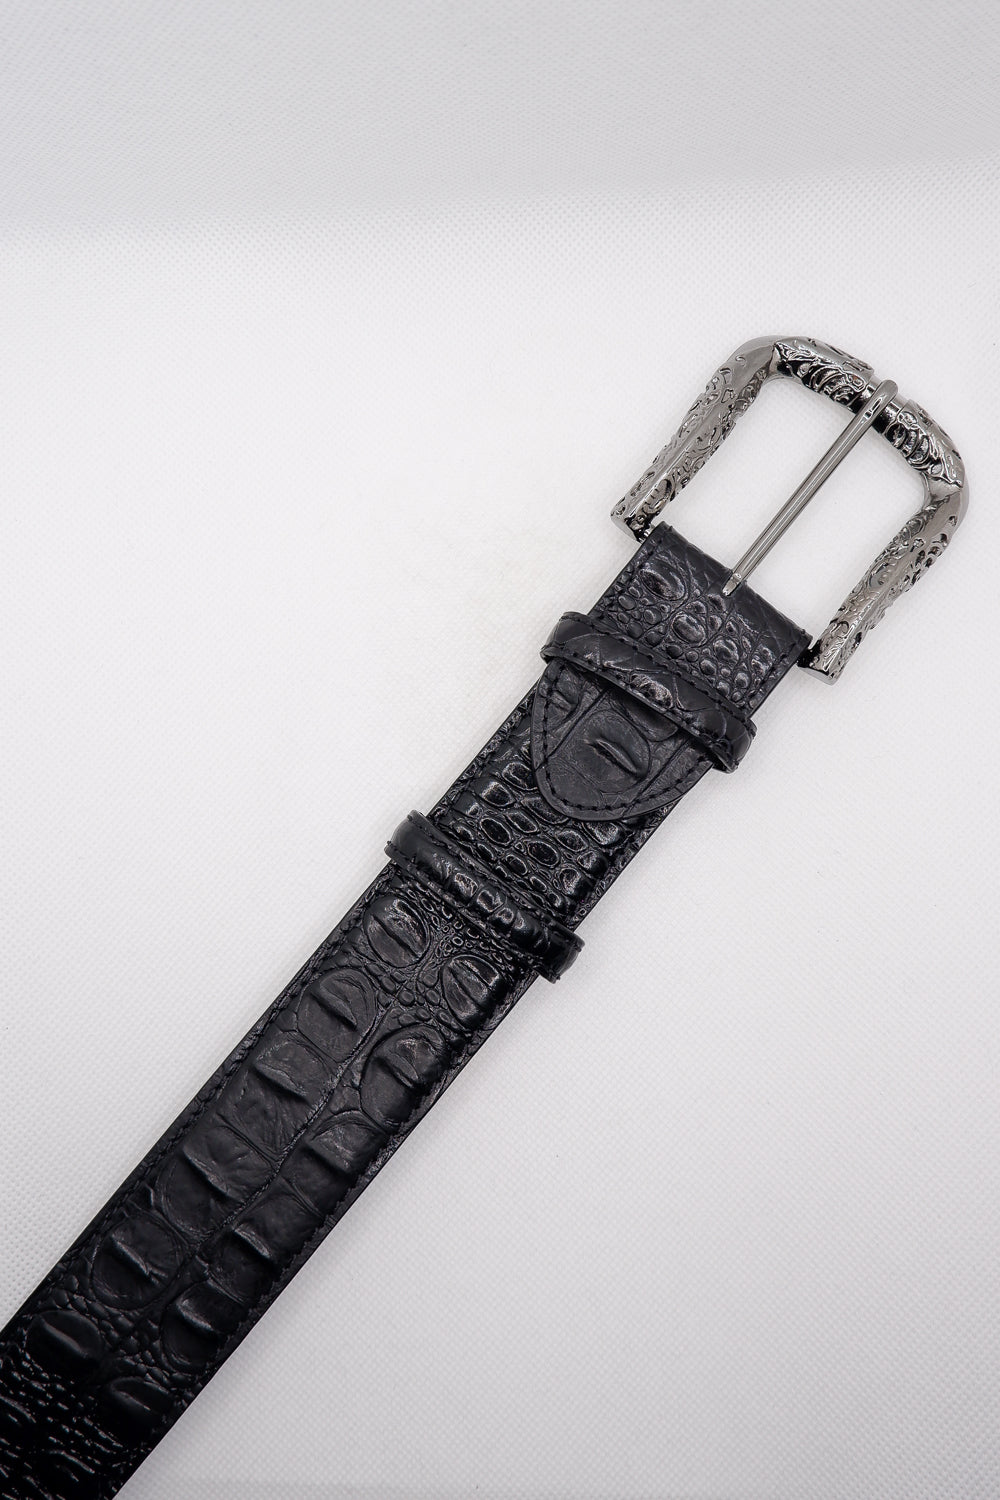 Buy the Elliot Rhodes Mock Croc Belt Black at Intro. Spend £50 for free UK delivery. Official stockists. We ship worldwide.